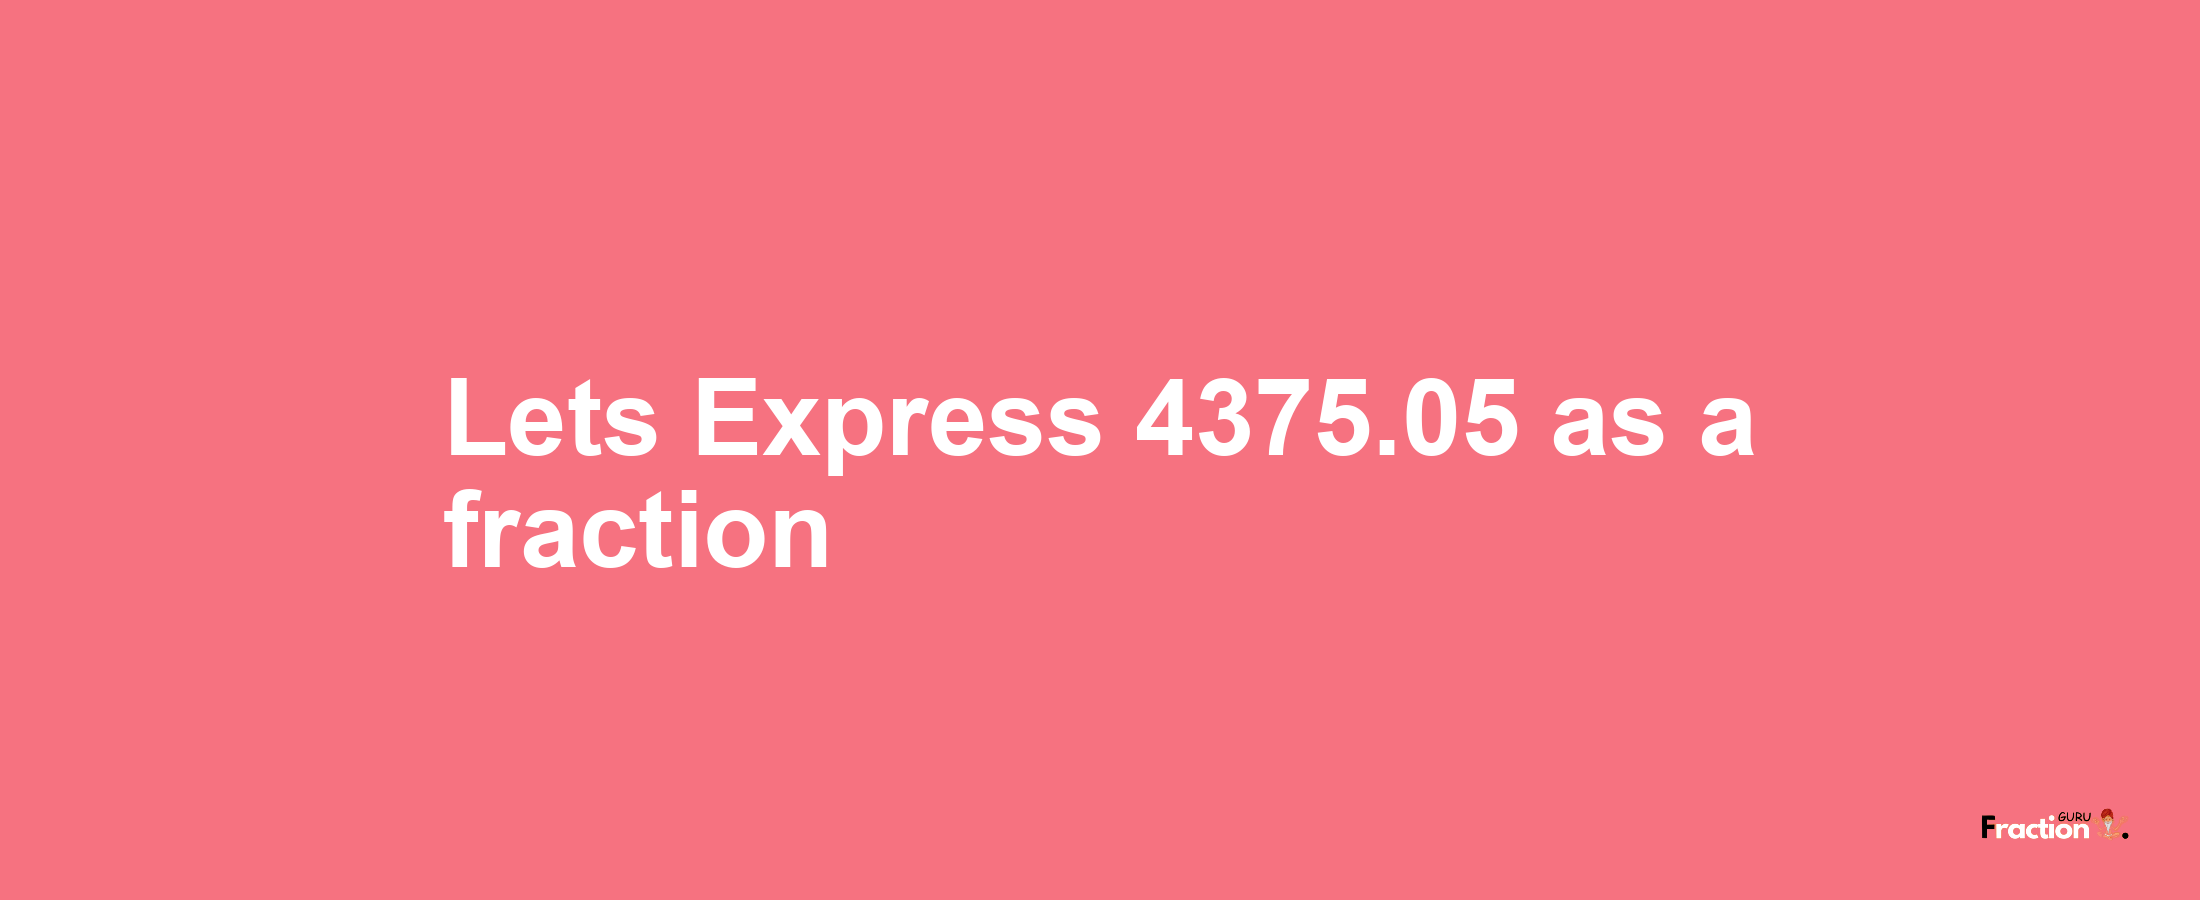 Lets Express 4375.05 as afraction